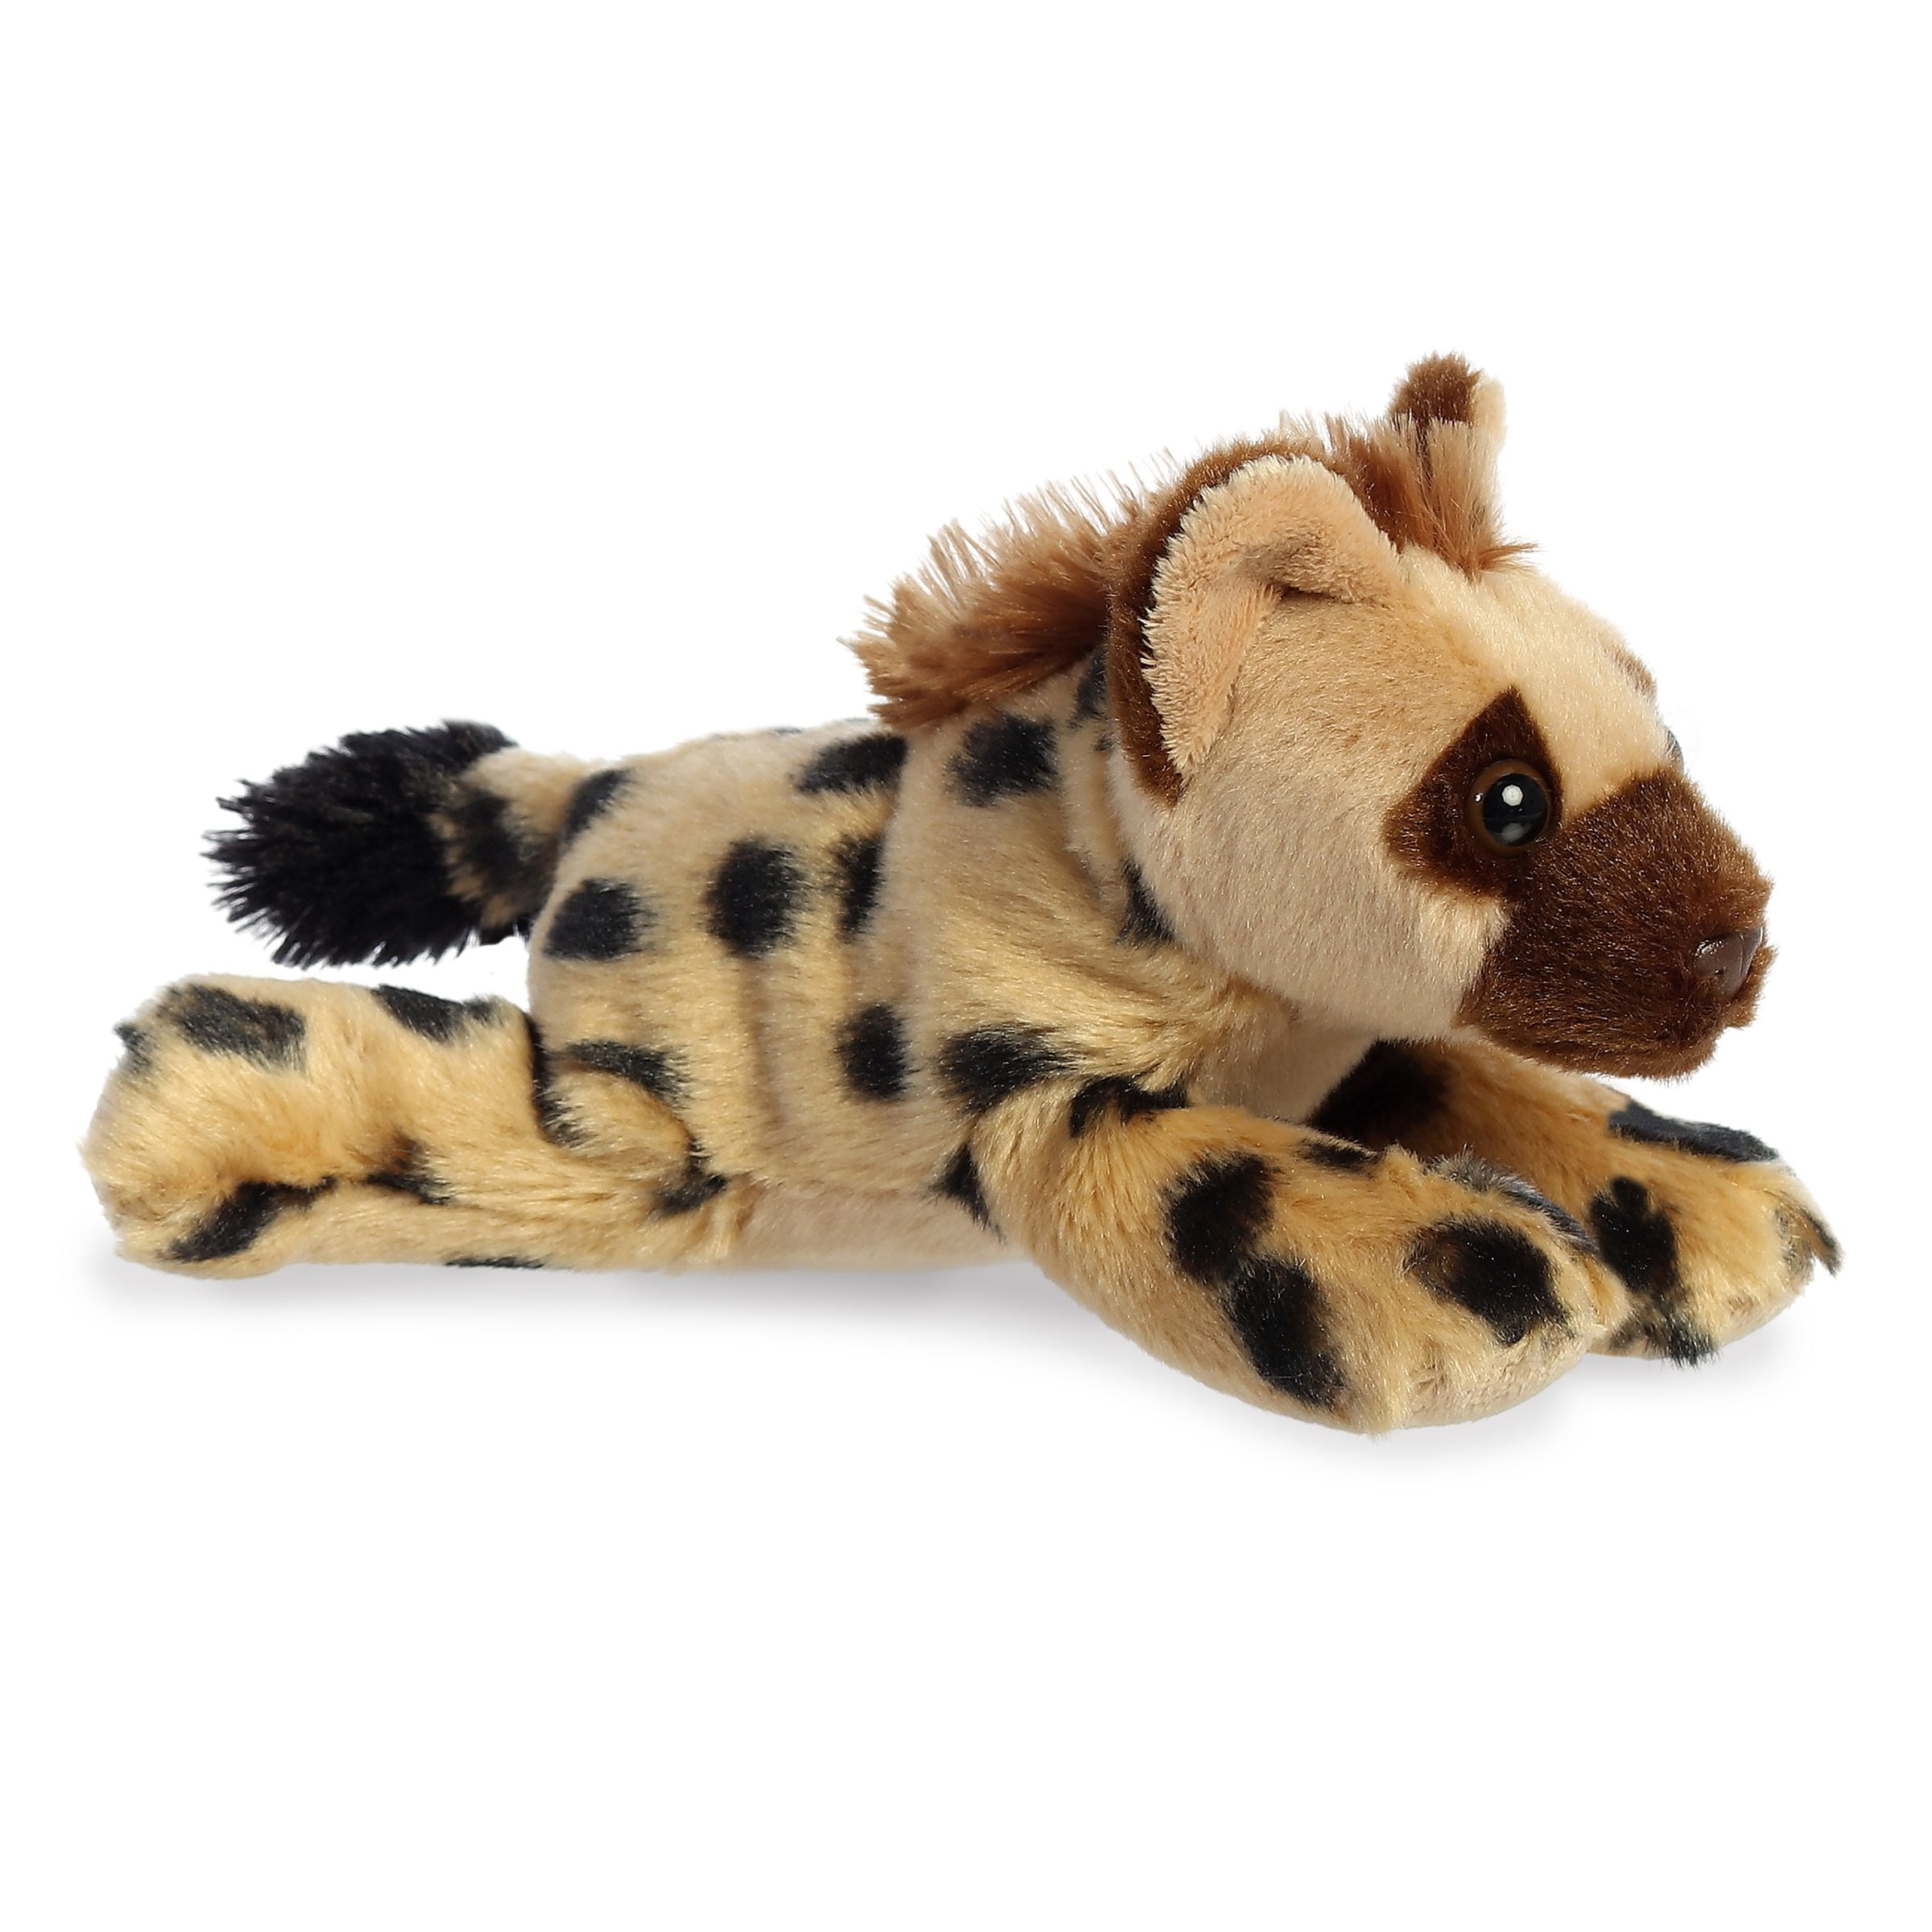 Aurora® Adorable Mini Flopsie™ Chip™ Stuffed Animal - Playful Ease -  Timeless Companions - Brown 8 Inches